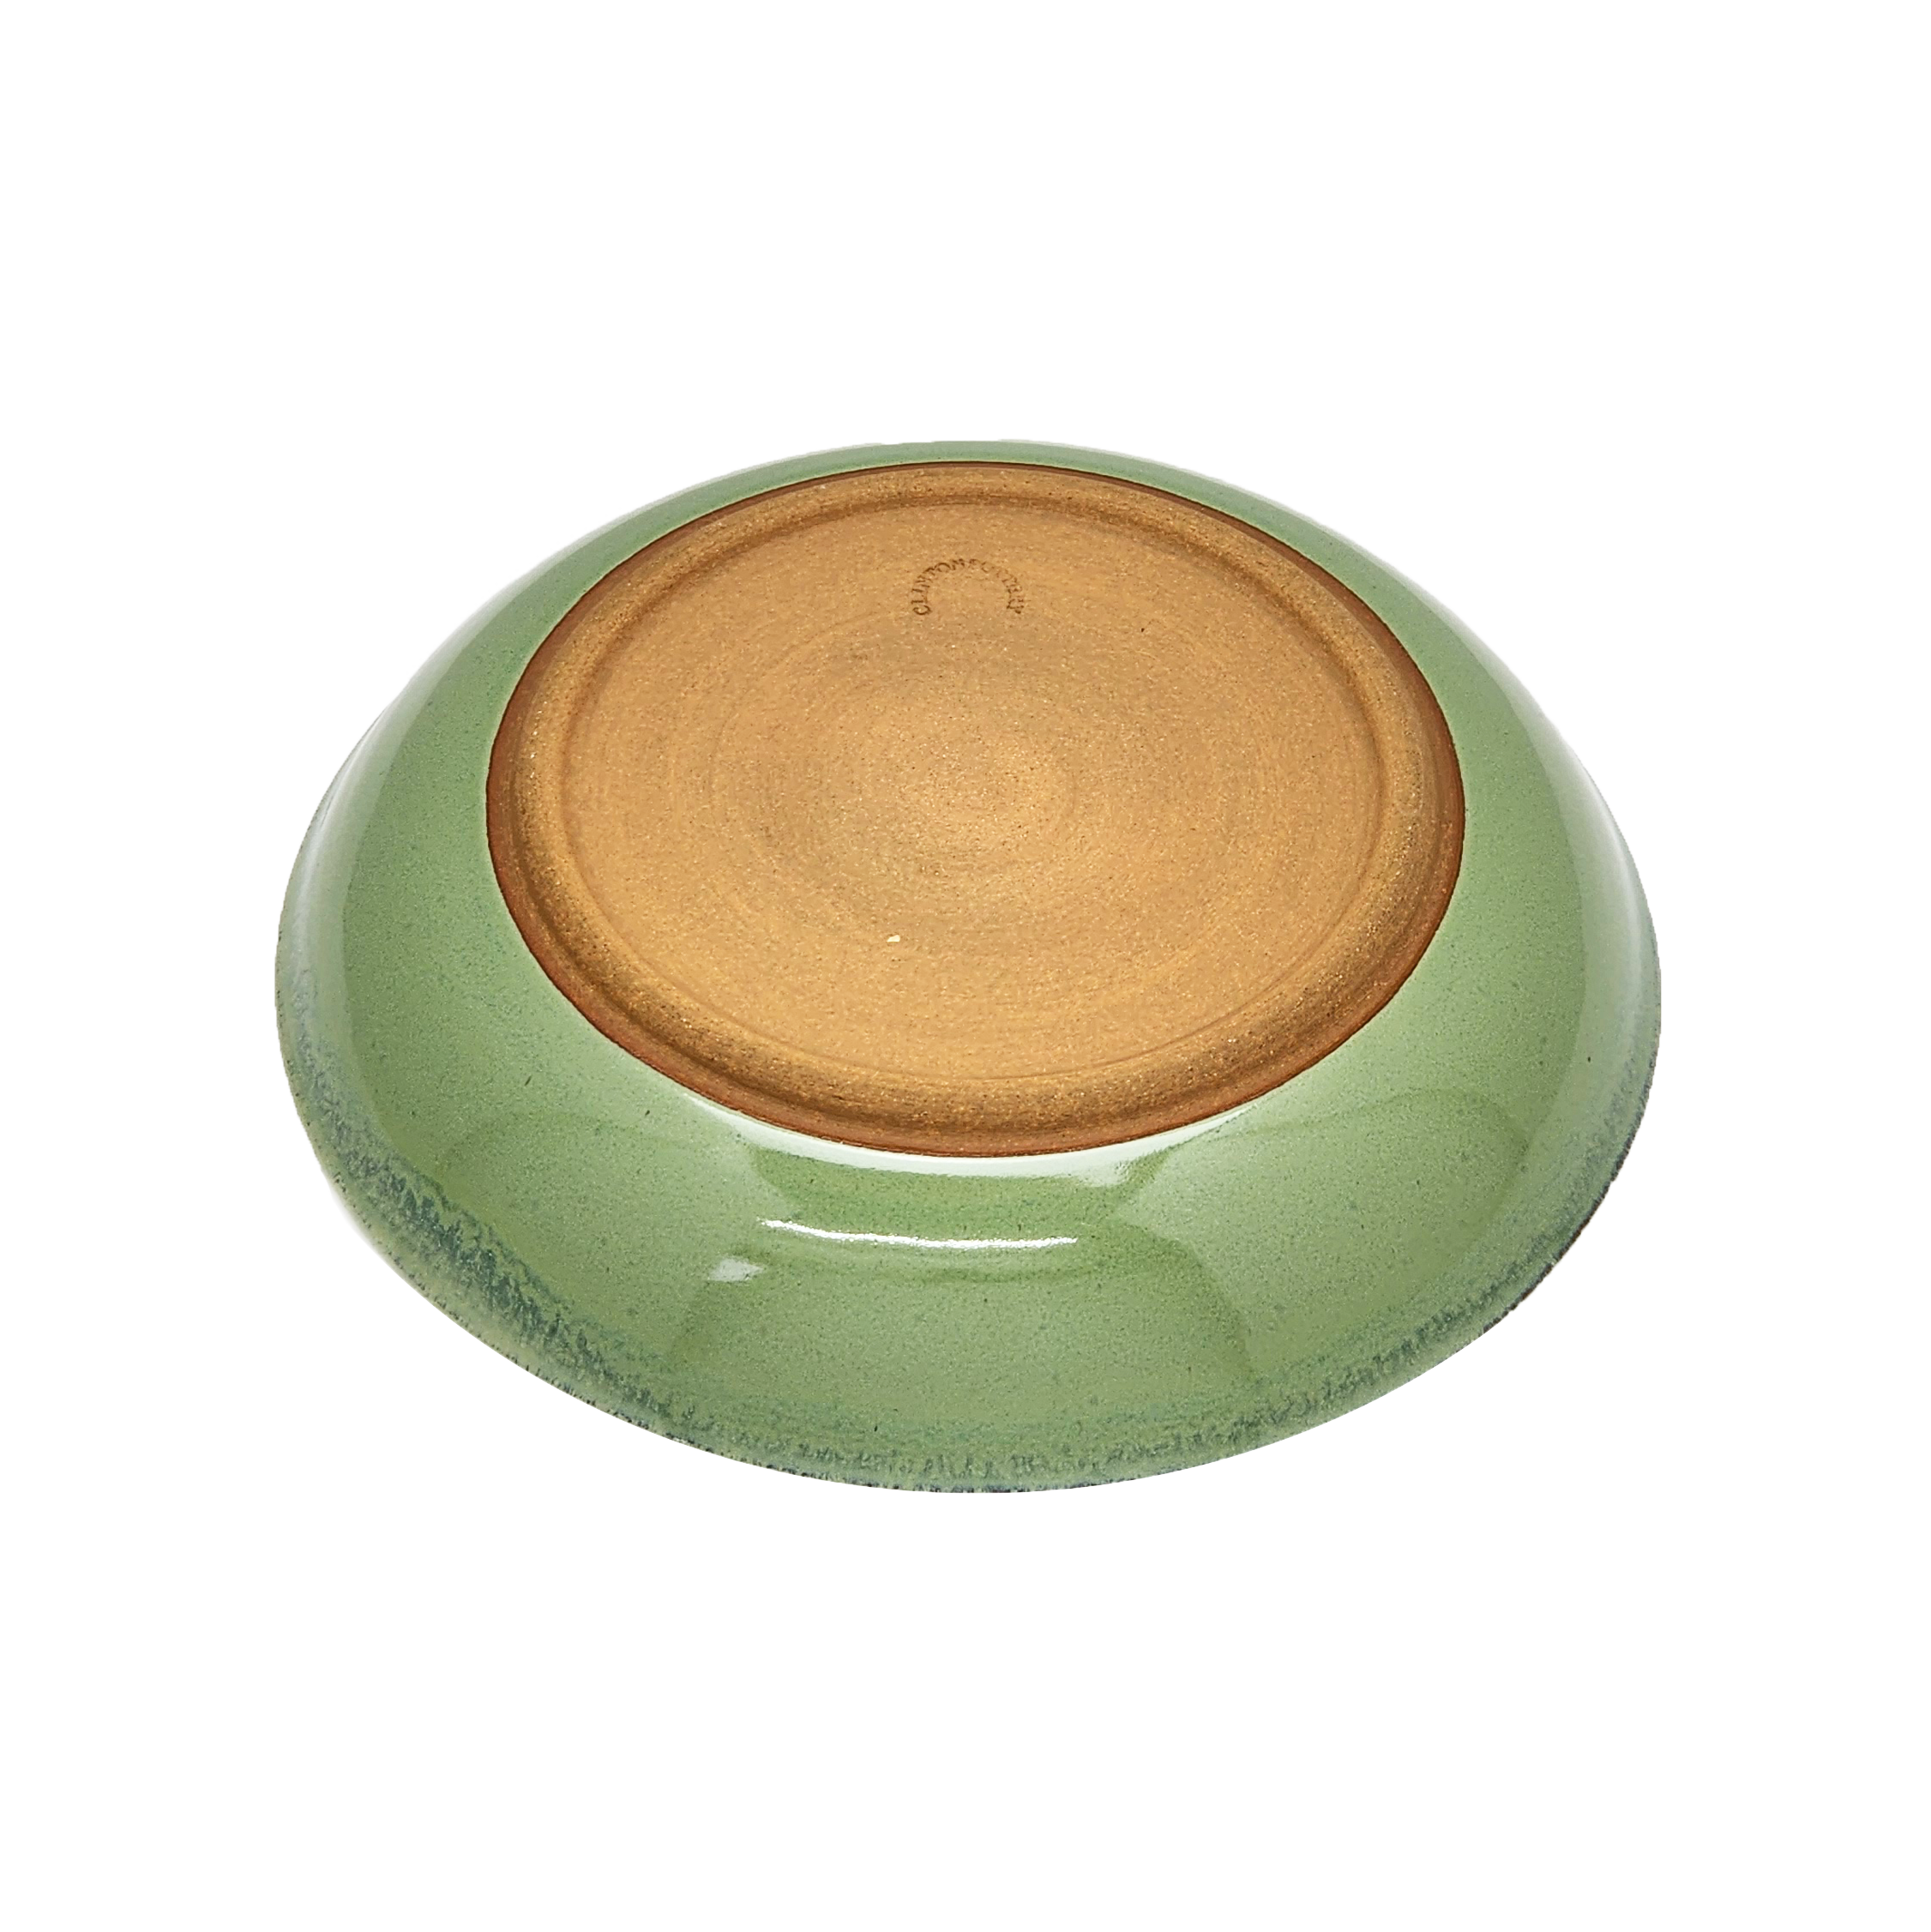 Image: A large pasta dish with a diameter of 10 inches, meticulously crafted by Clinton Pottery, featuring a refreshing bud green glaze. The vibrant green color of the glaze adds a lively touch to the dish, making it an inviting choice for serving pasta dishes with a hint of natural charm.